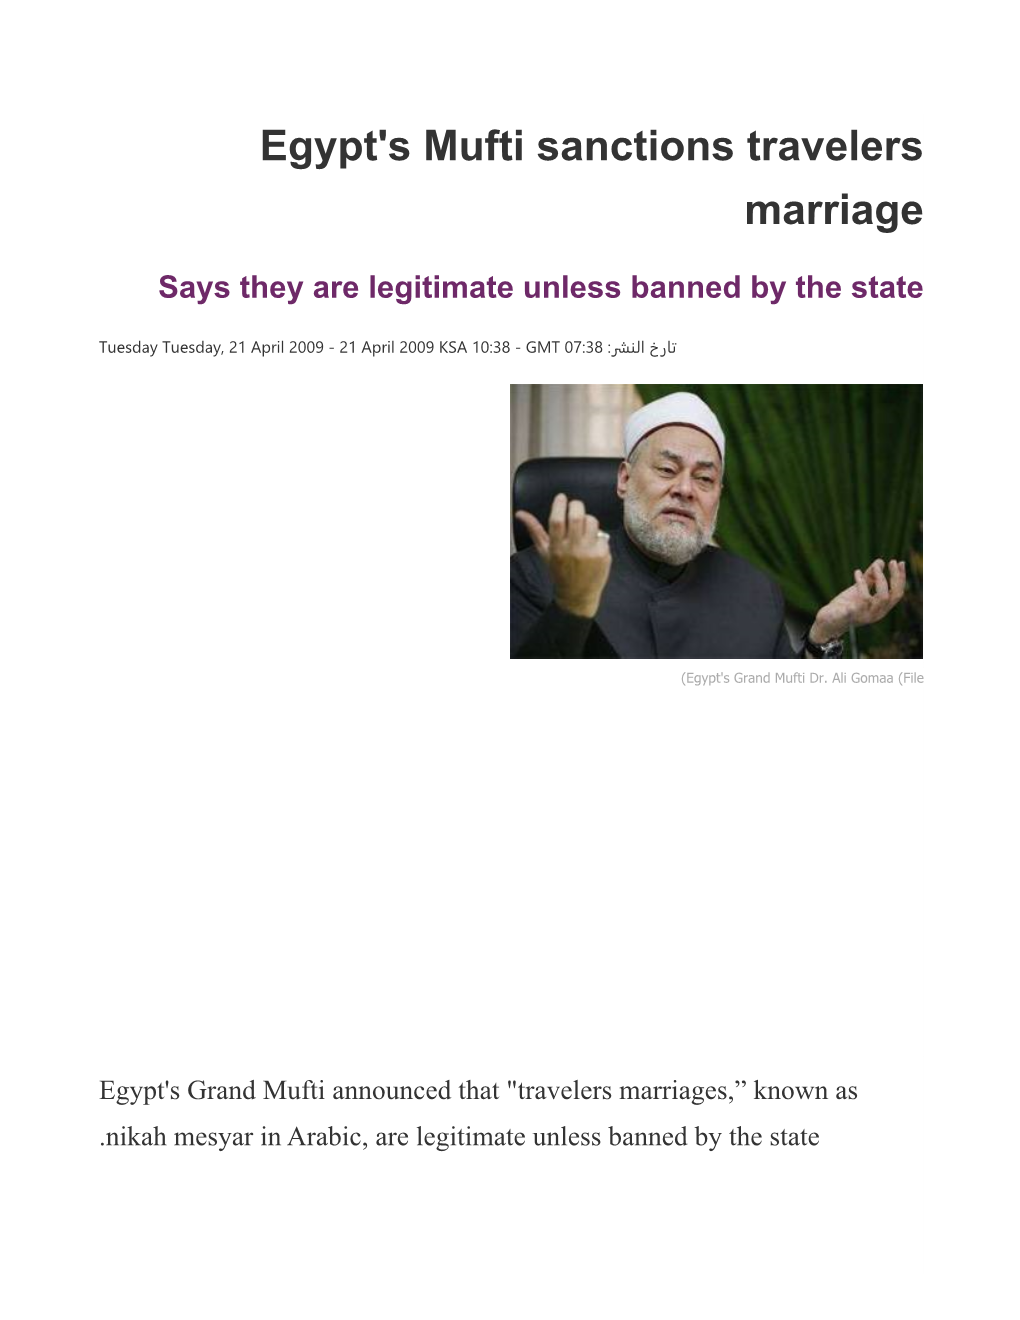 Egypt's Mufti Sanctions Travelers Marriage